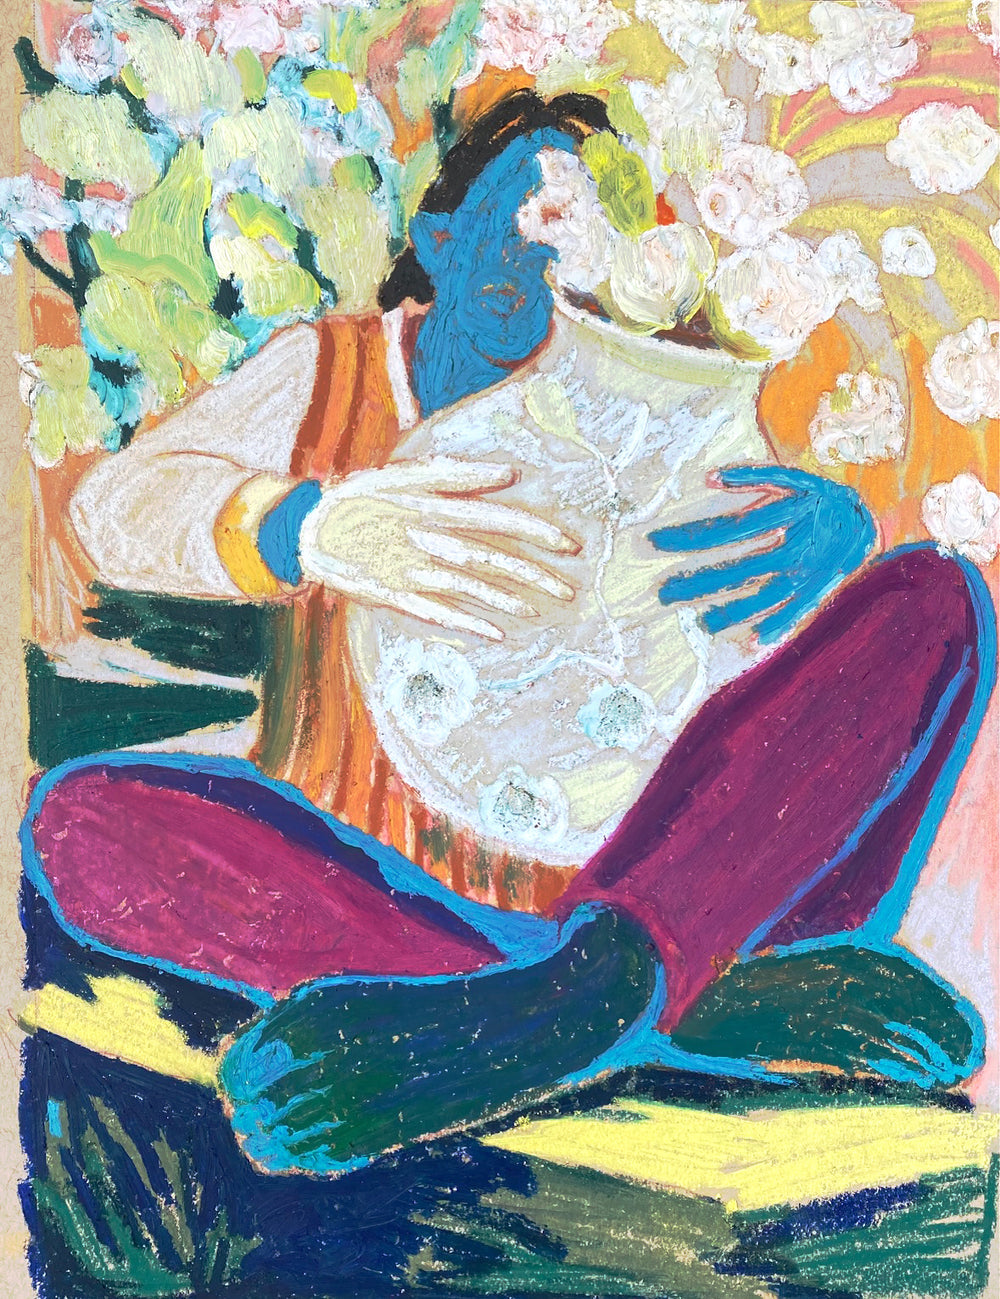 A colorful painting of a person holding a vase of flowers